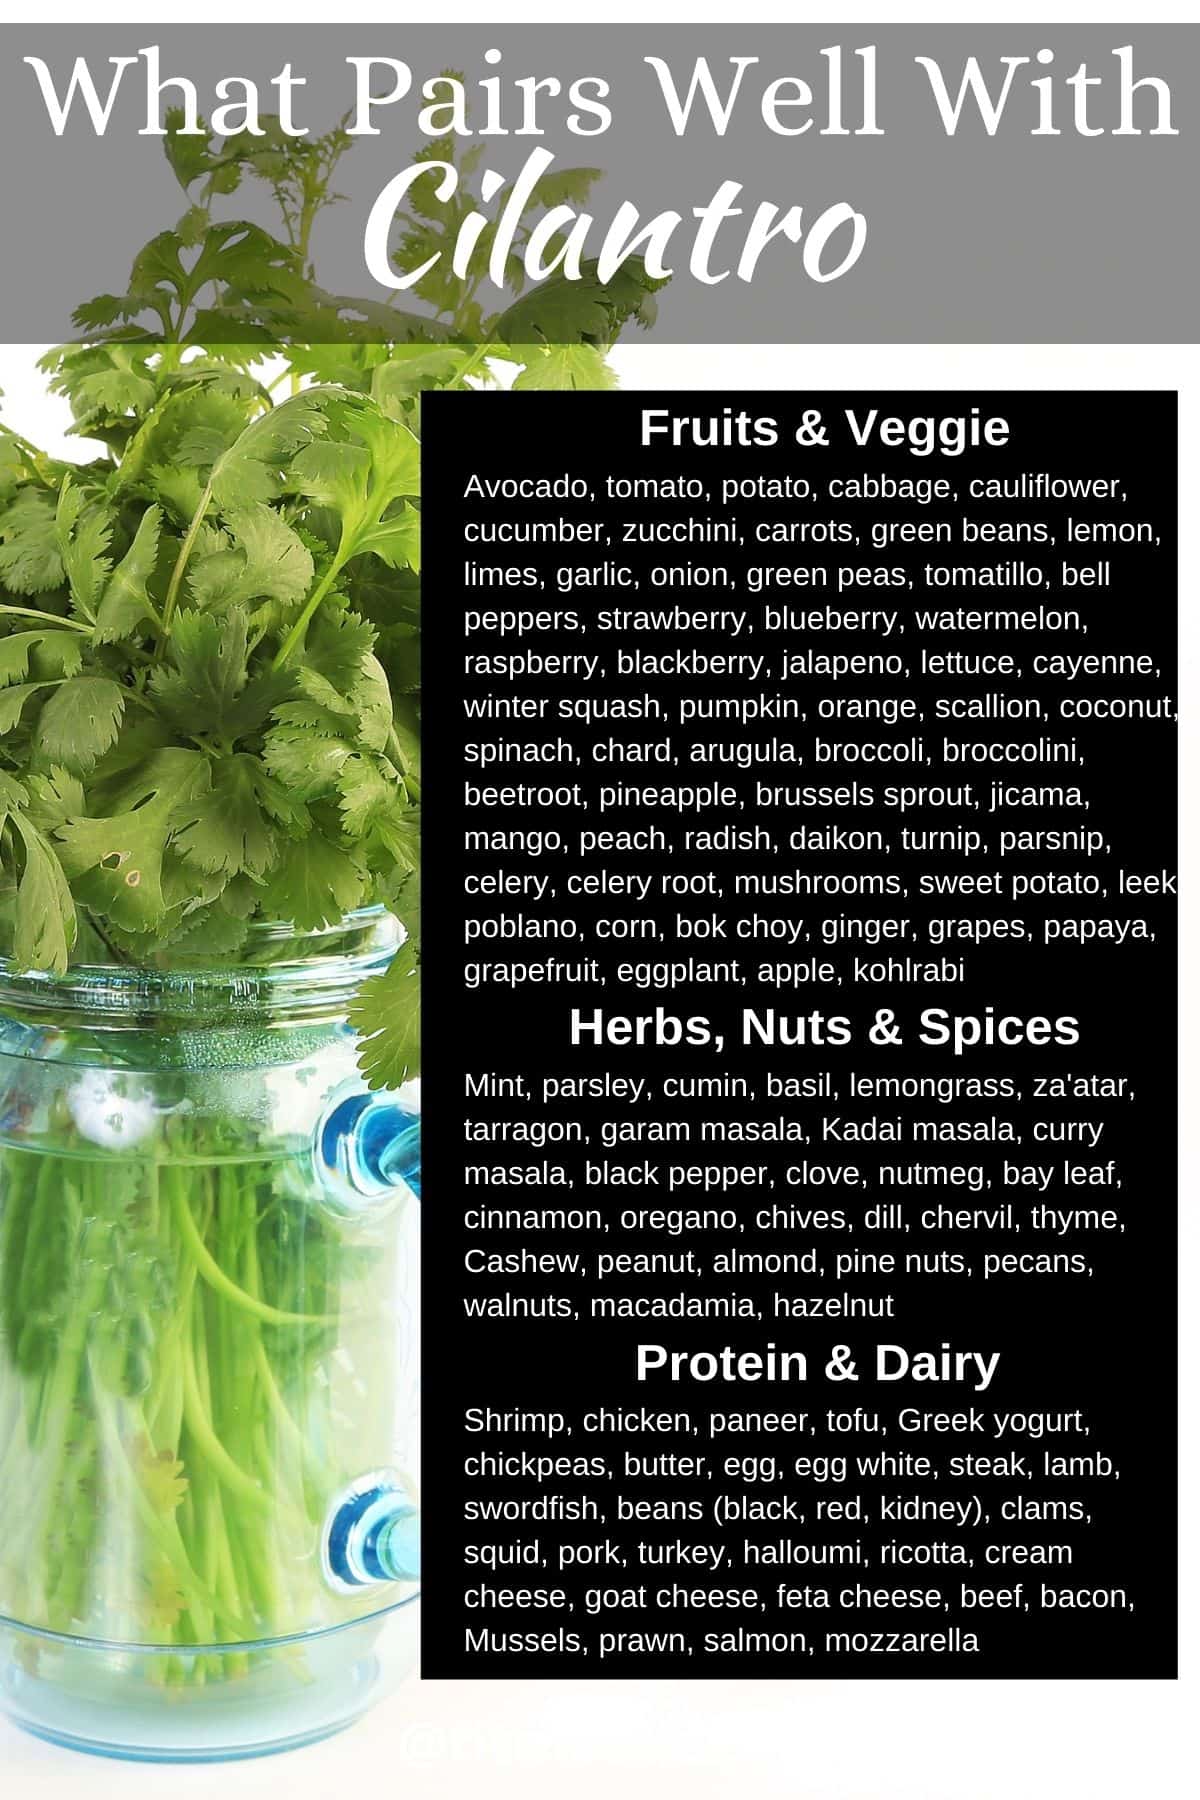 infographic of cilantro showing what flavors pair well with it.